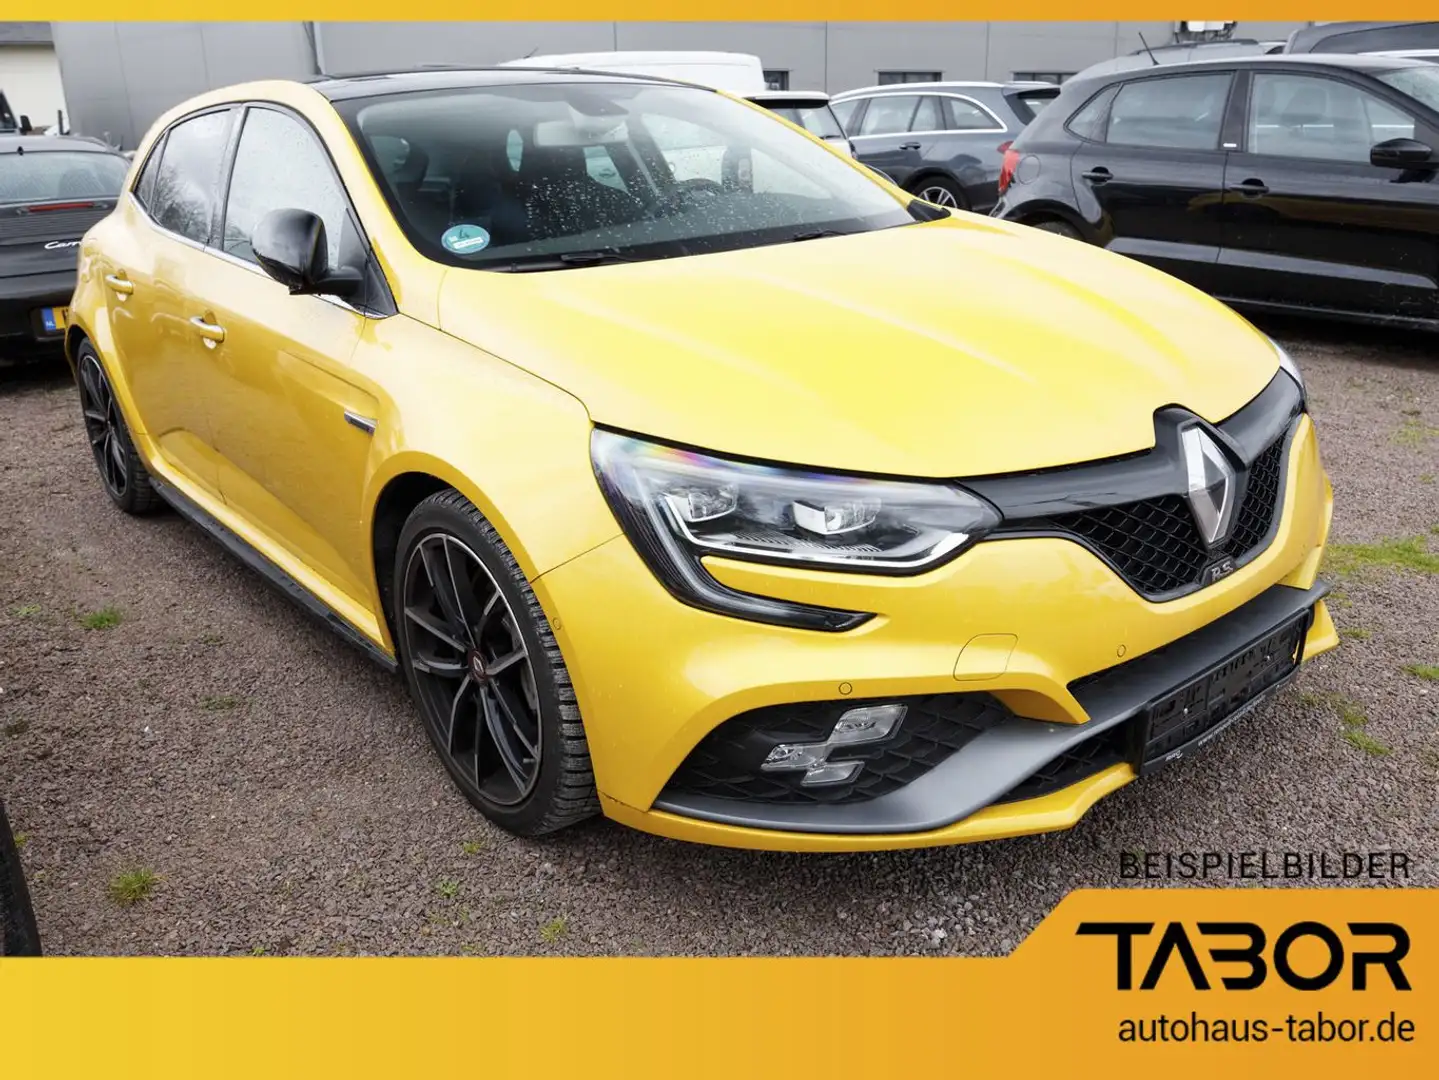 Renault Megane IV 1.8 TCe 280 EDC R.S. LED Nav SchiebeD Yellow - 2